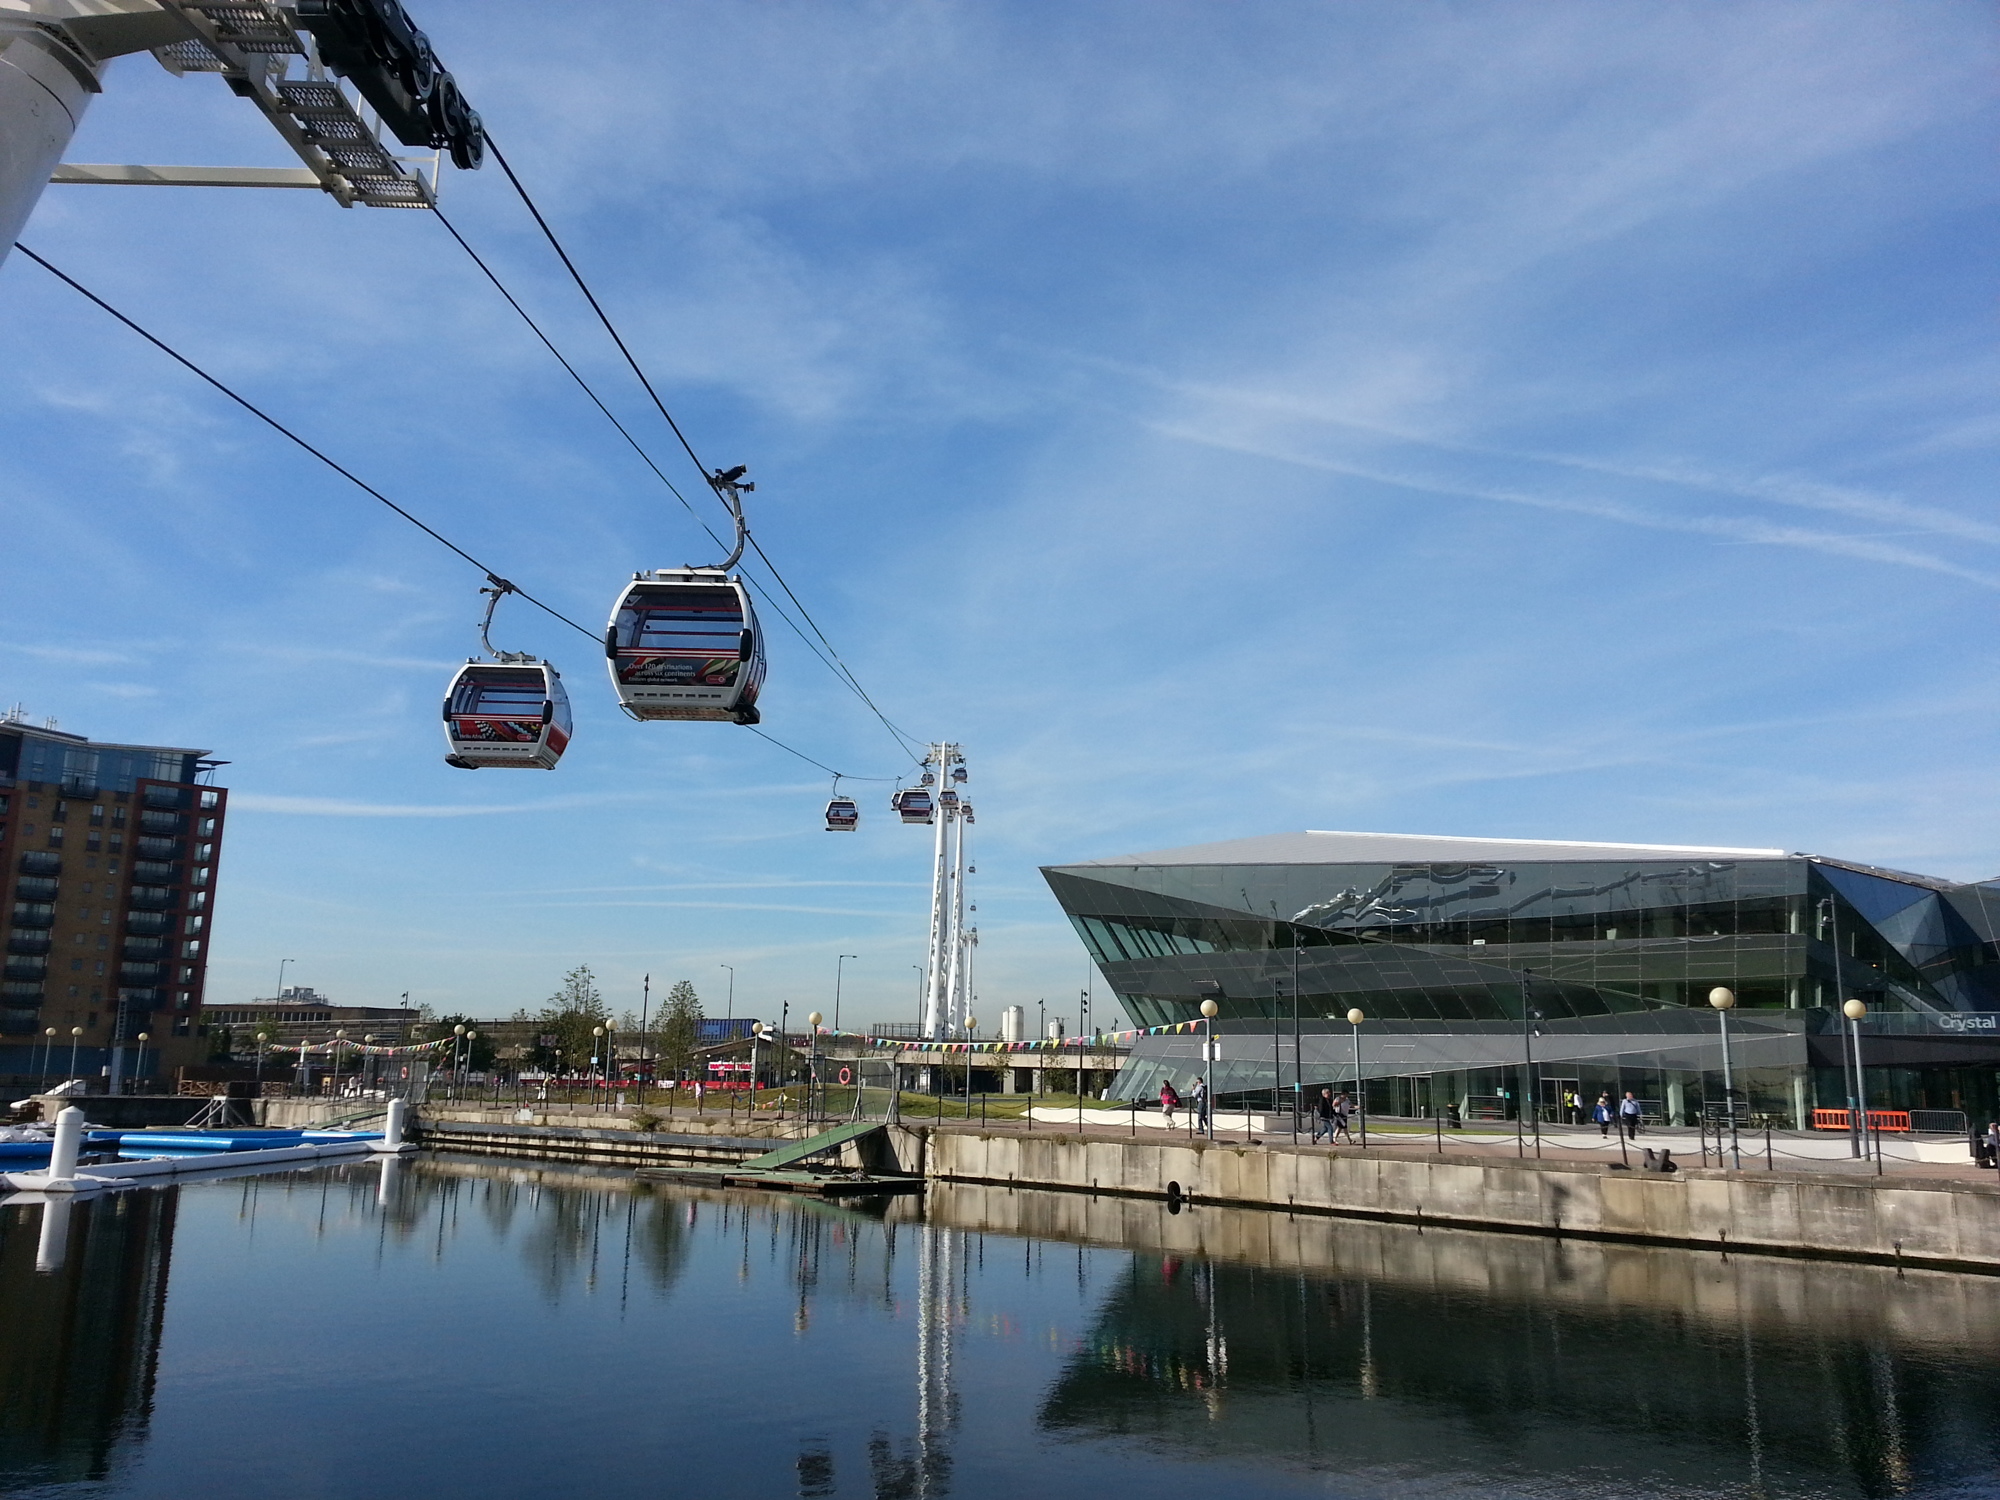 The Emirates Air Line crosses the River Thames in London.  Developer Mike Balanky envisions a similar service over the St. Johns River called the Jag-Wire.